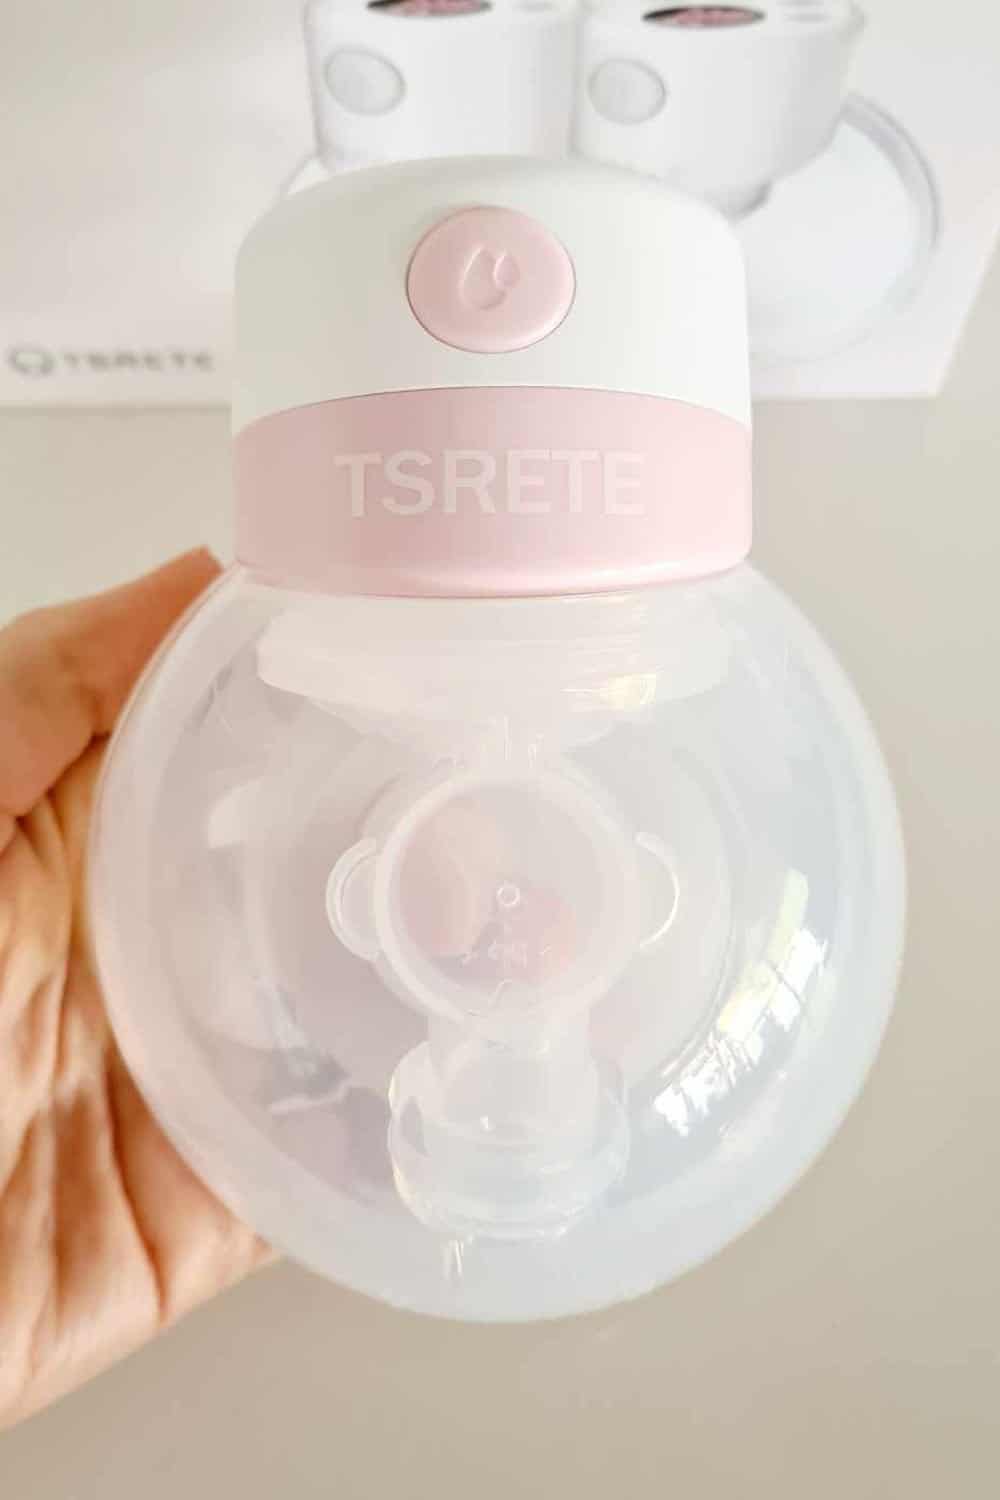 tsrete wearable breast pump review